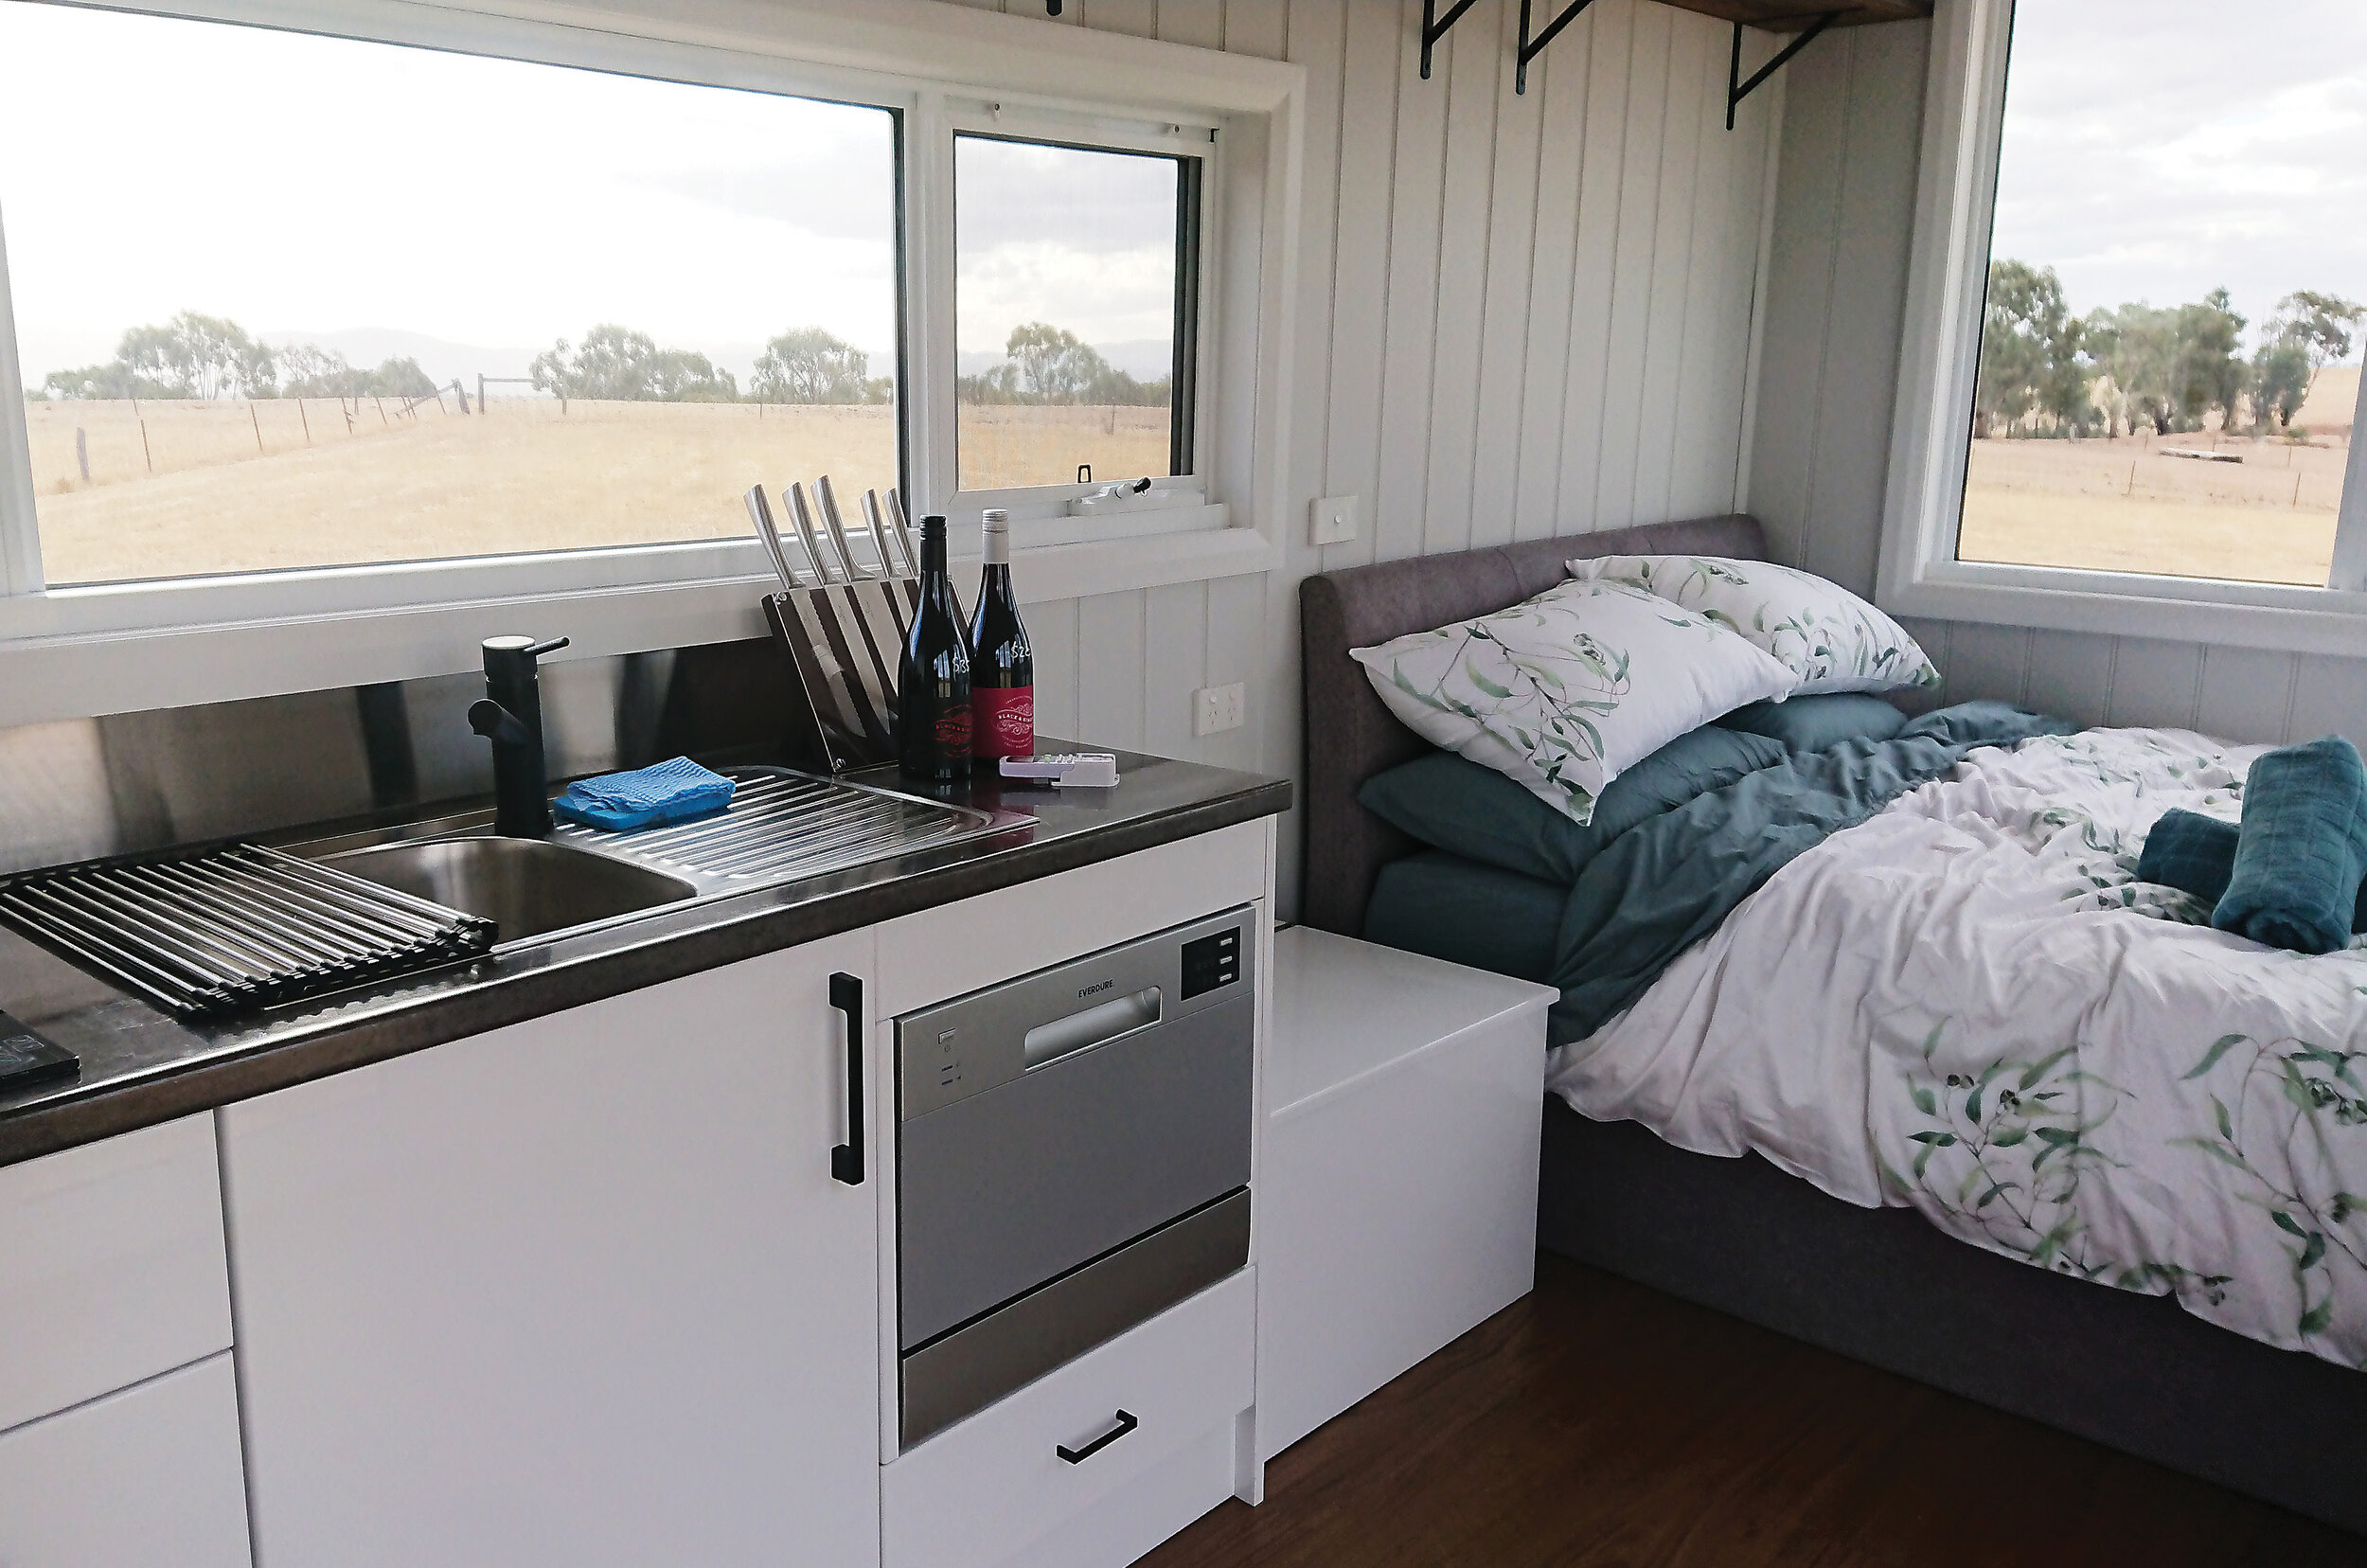 Hounds Run tiny house has all the modern fixtures including a dishwasher